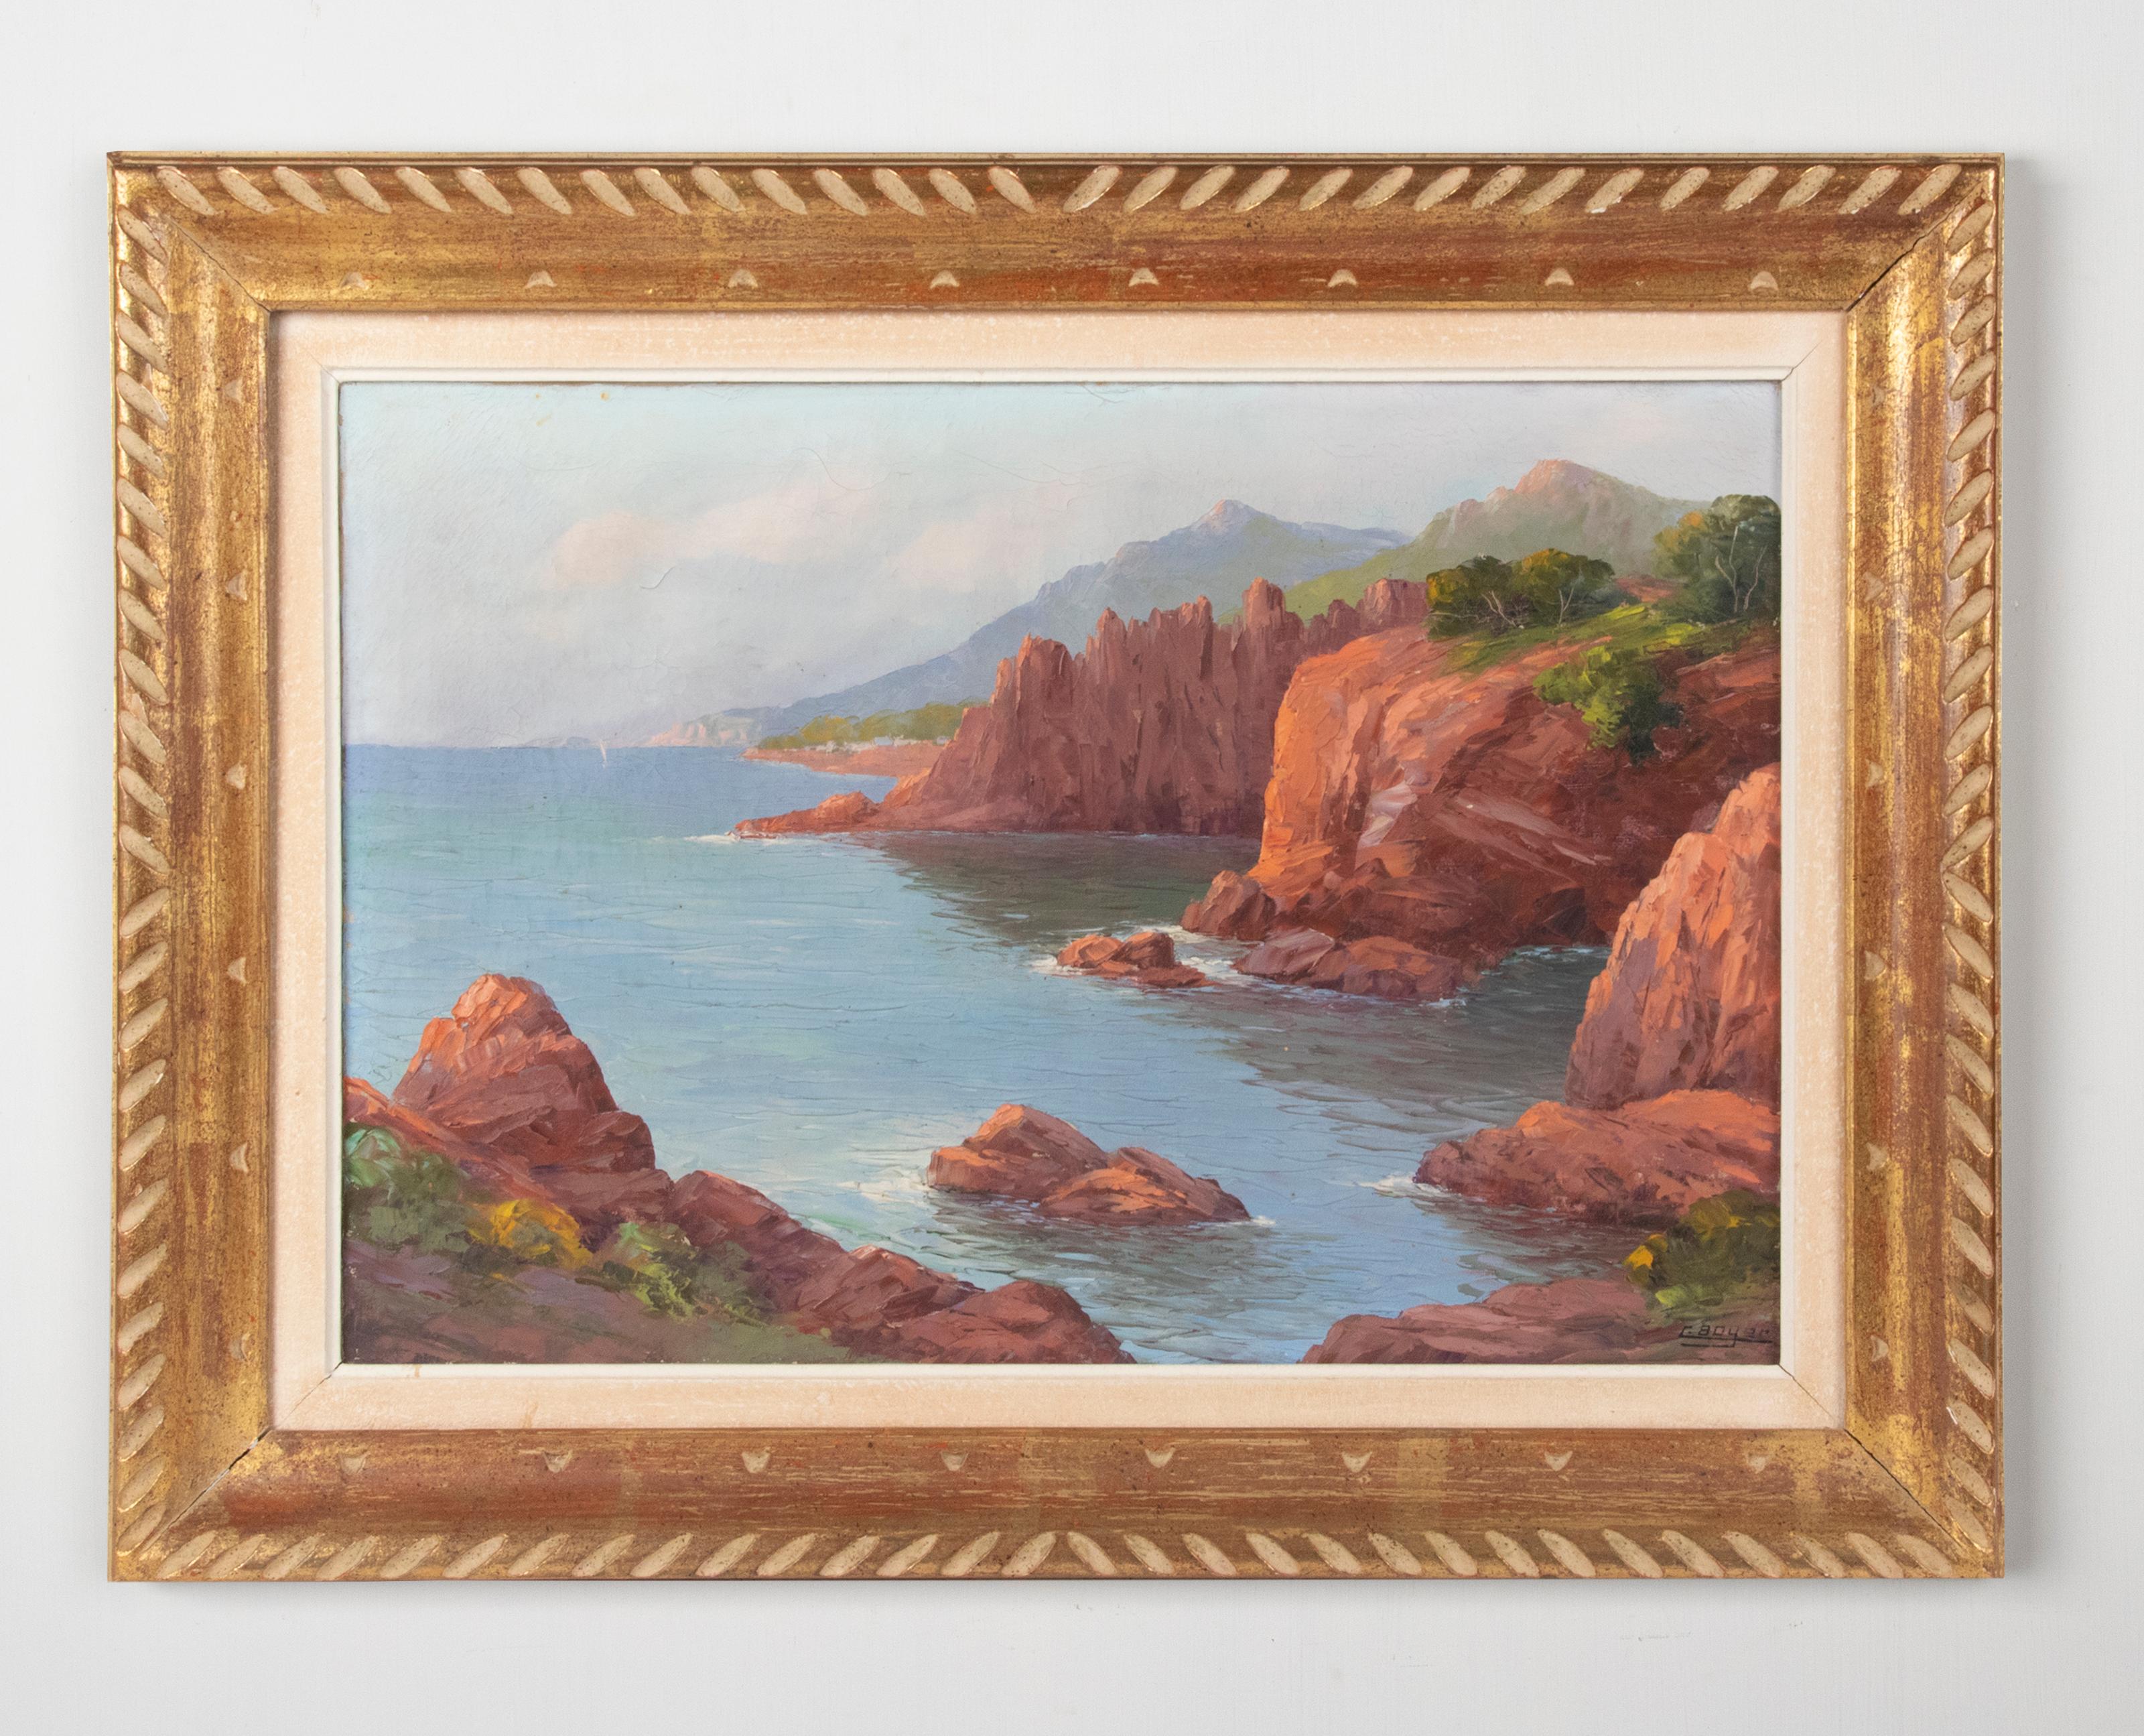 Beaux Arts Early 20th Century Mediterranean Coastal Landscape Painting by Clément Boyer For Sale